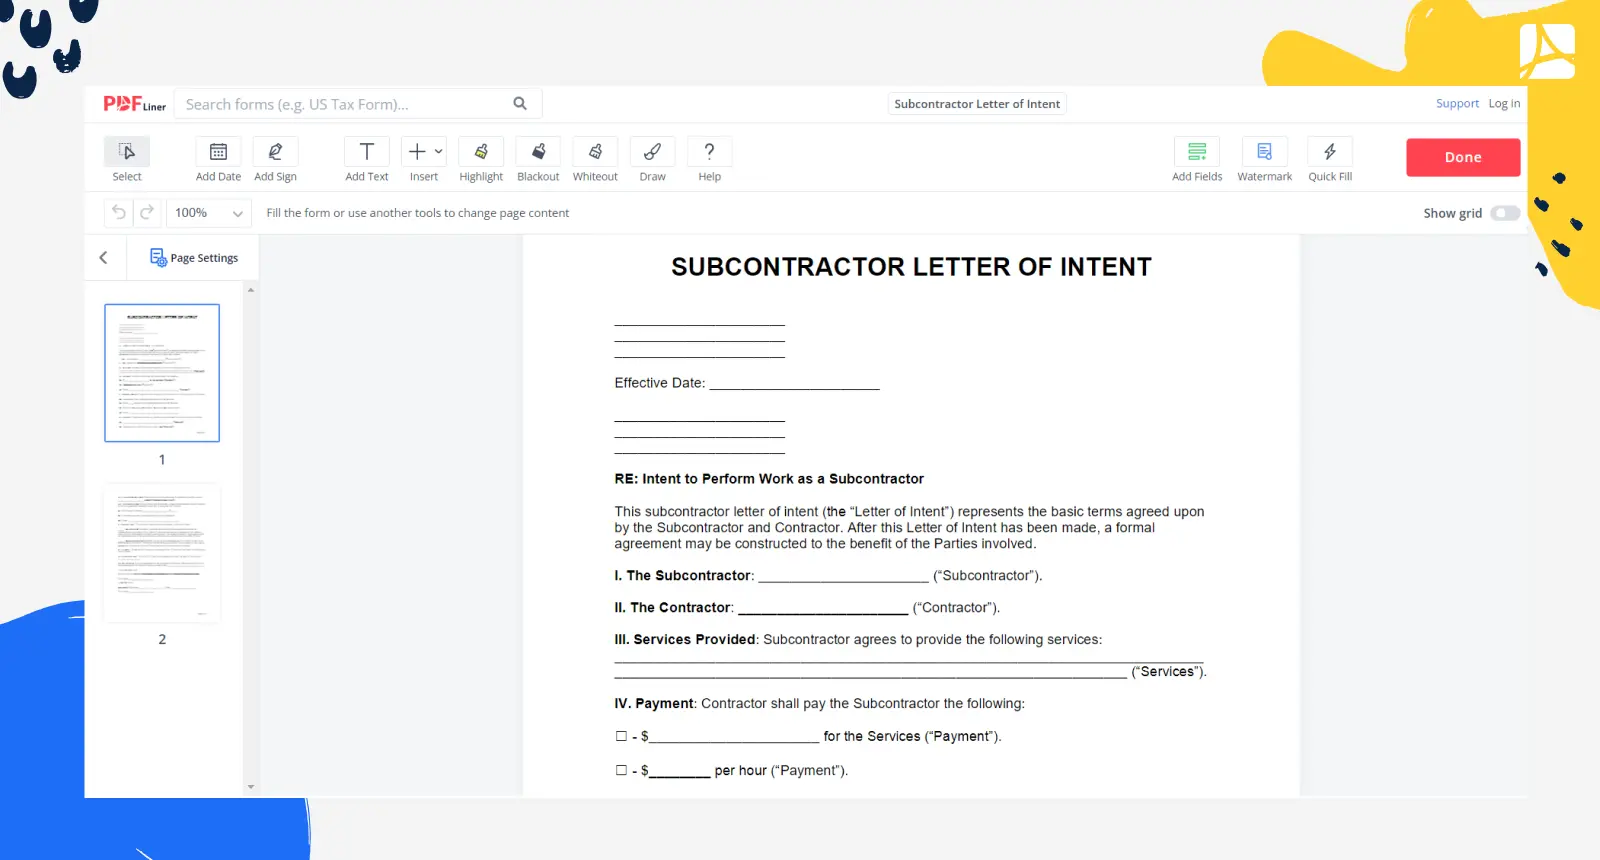 Subcontractor Letter of Intent Form Screenshot